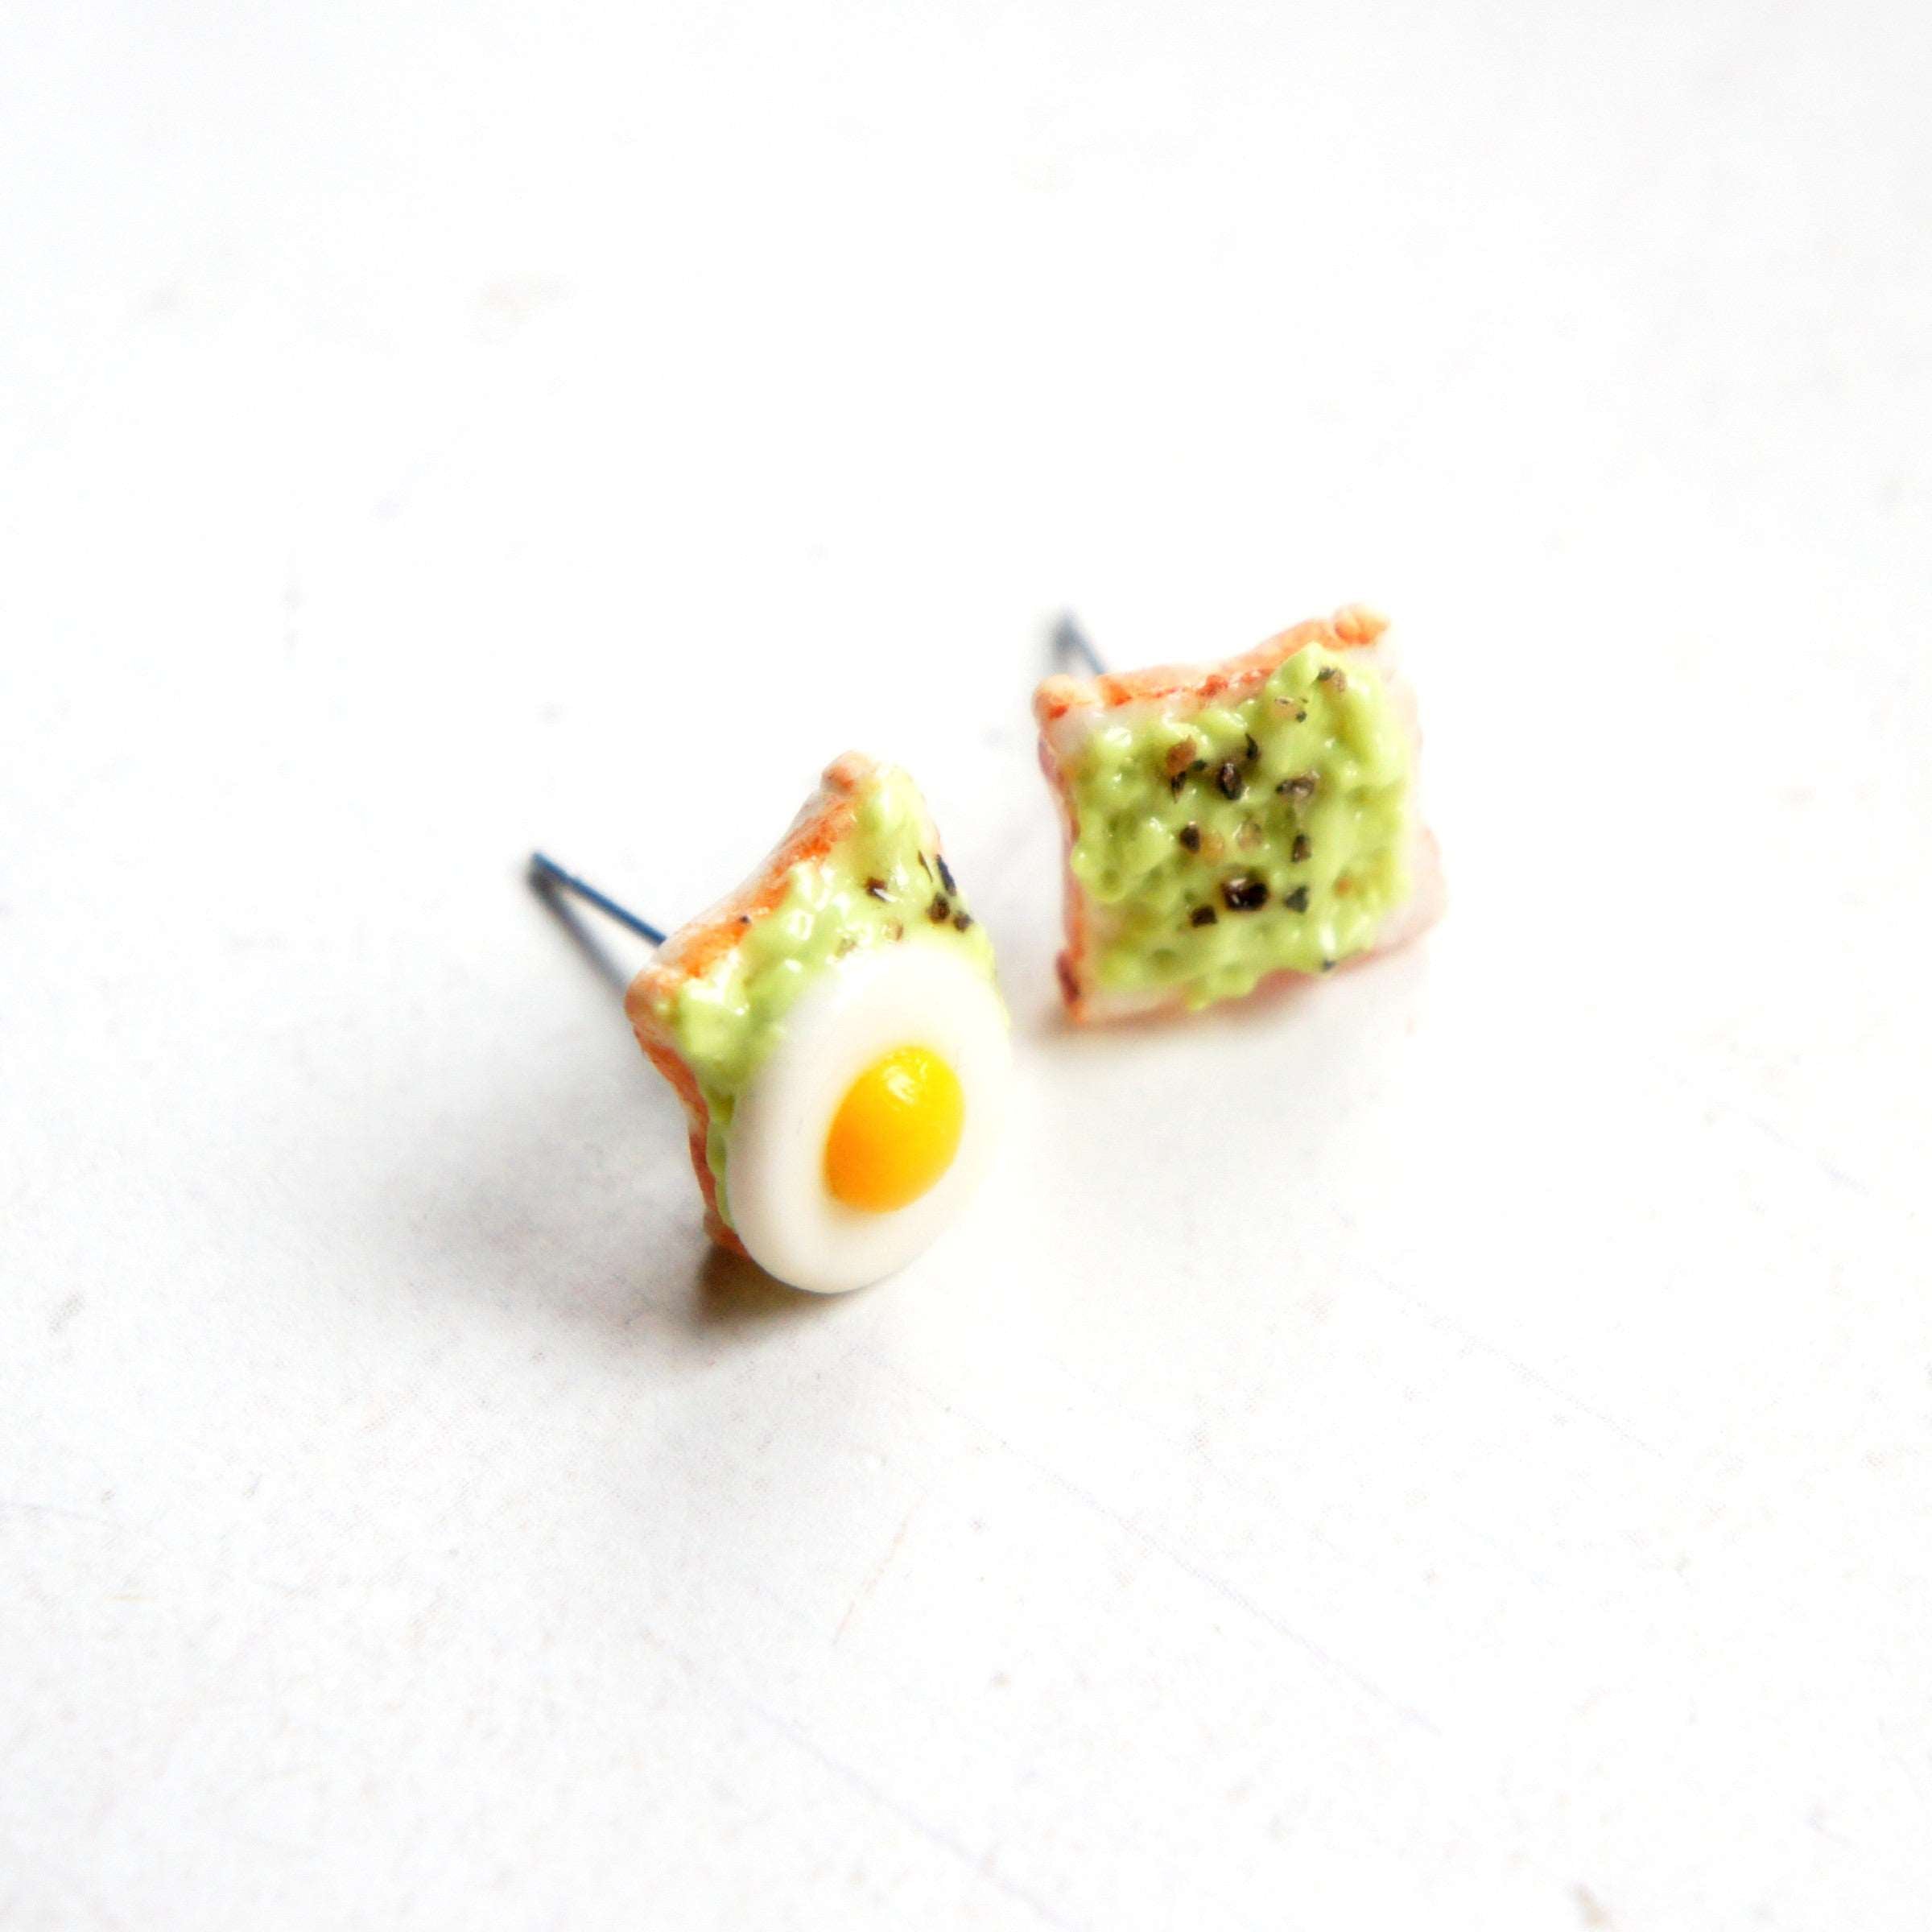 Avocado Toast Stud Earrings - Jillicious charms and accessories